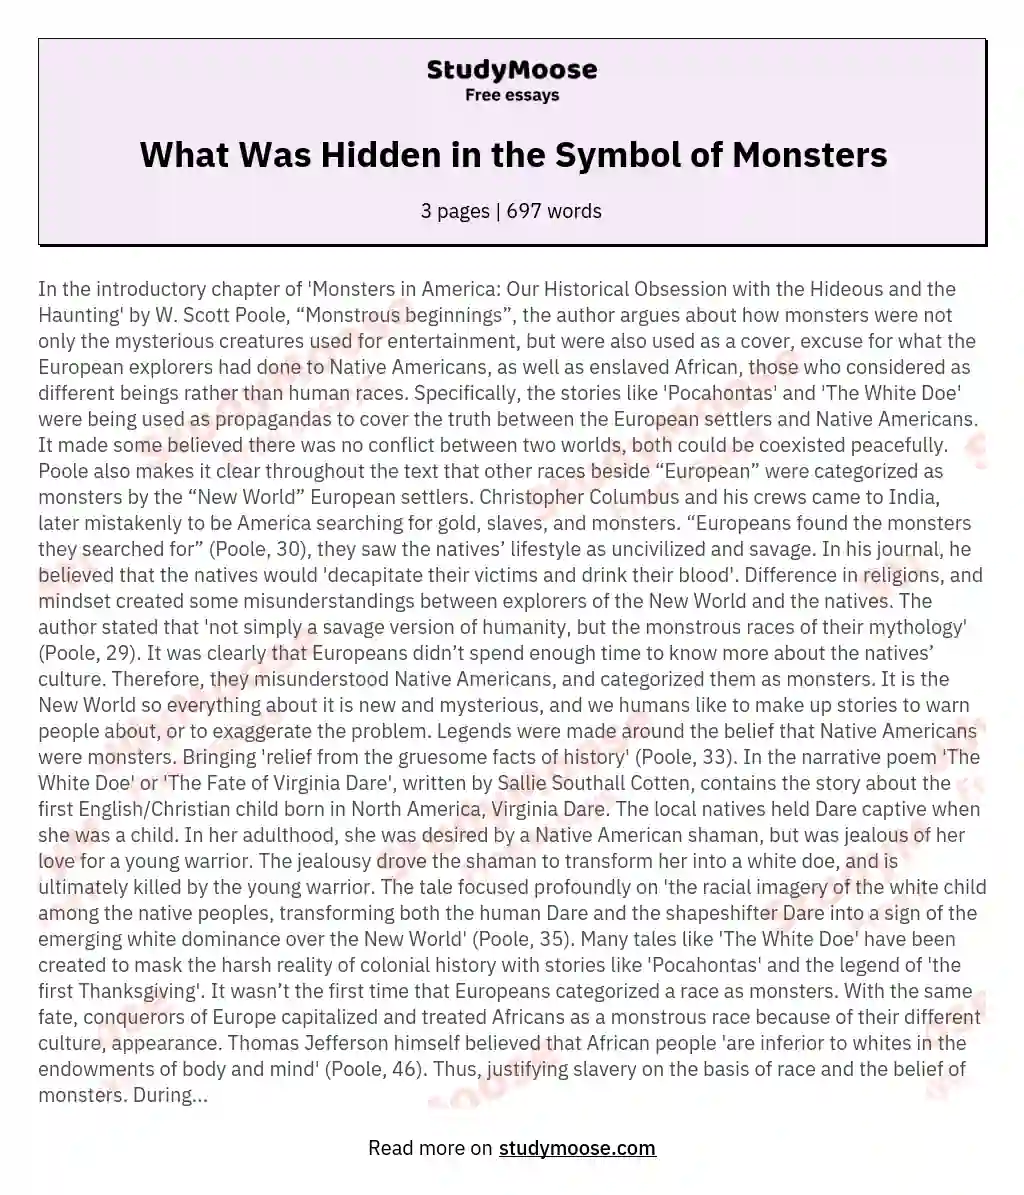 What Was Hidden in the Symbol of Monsters essay